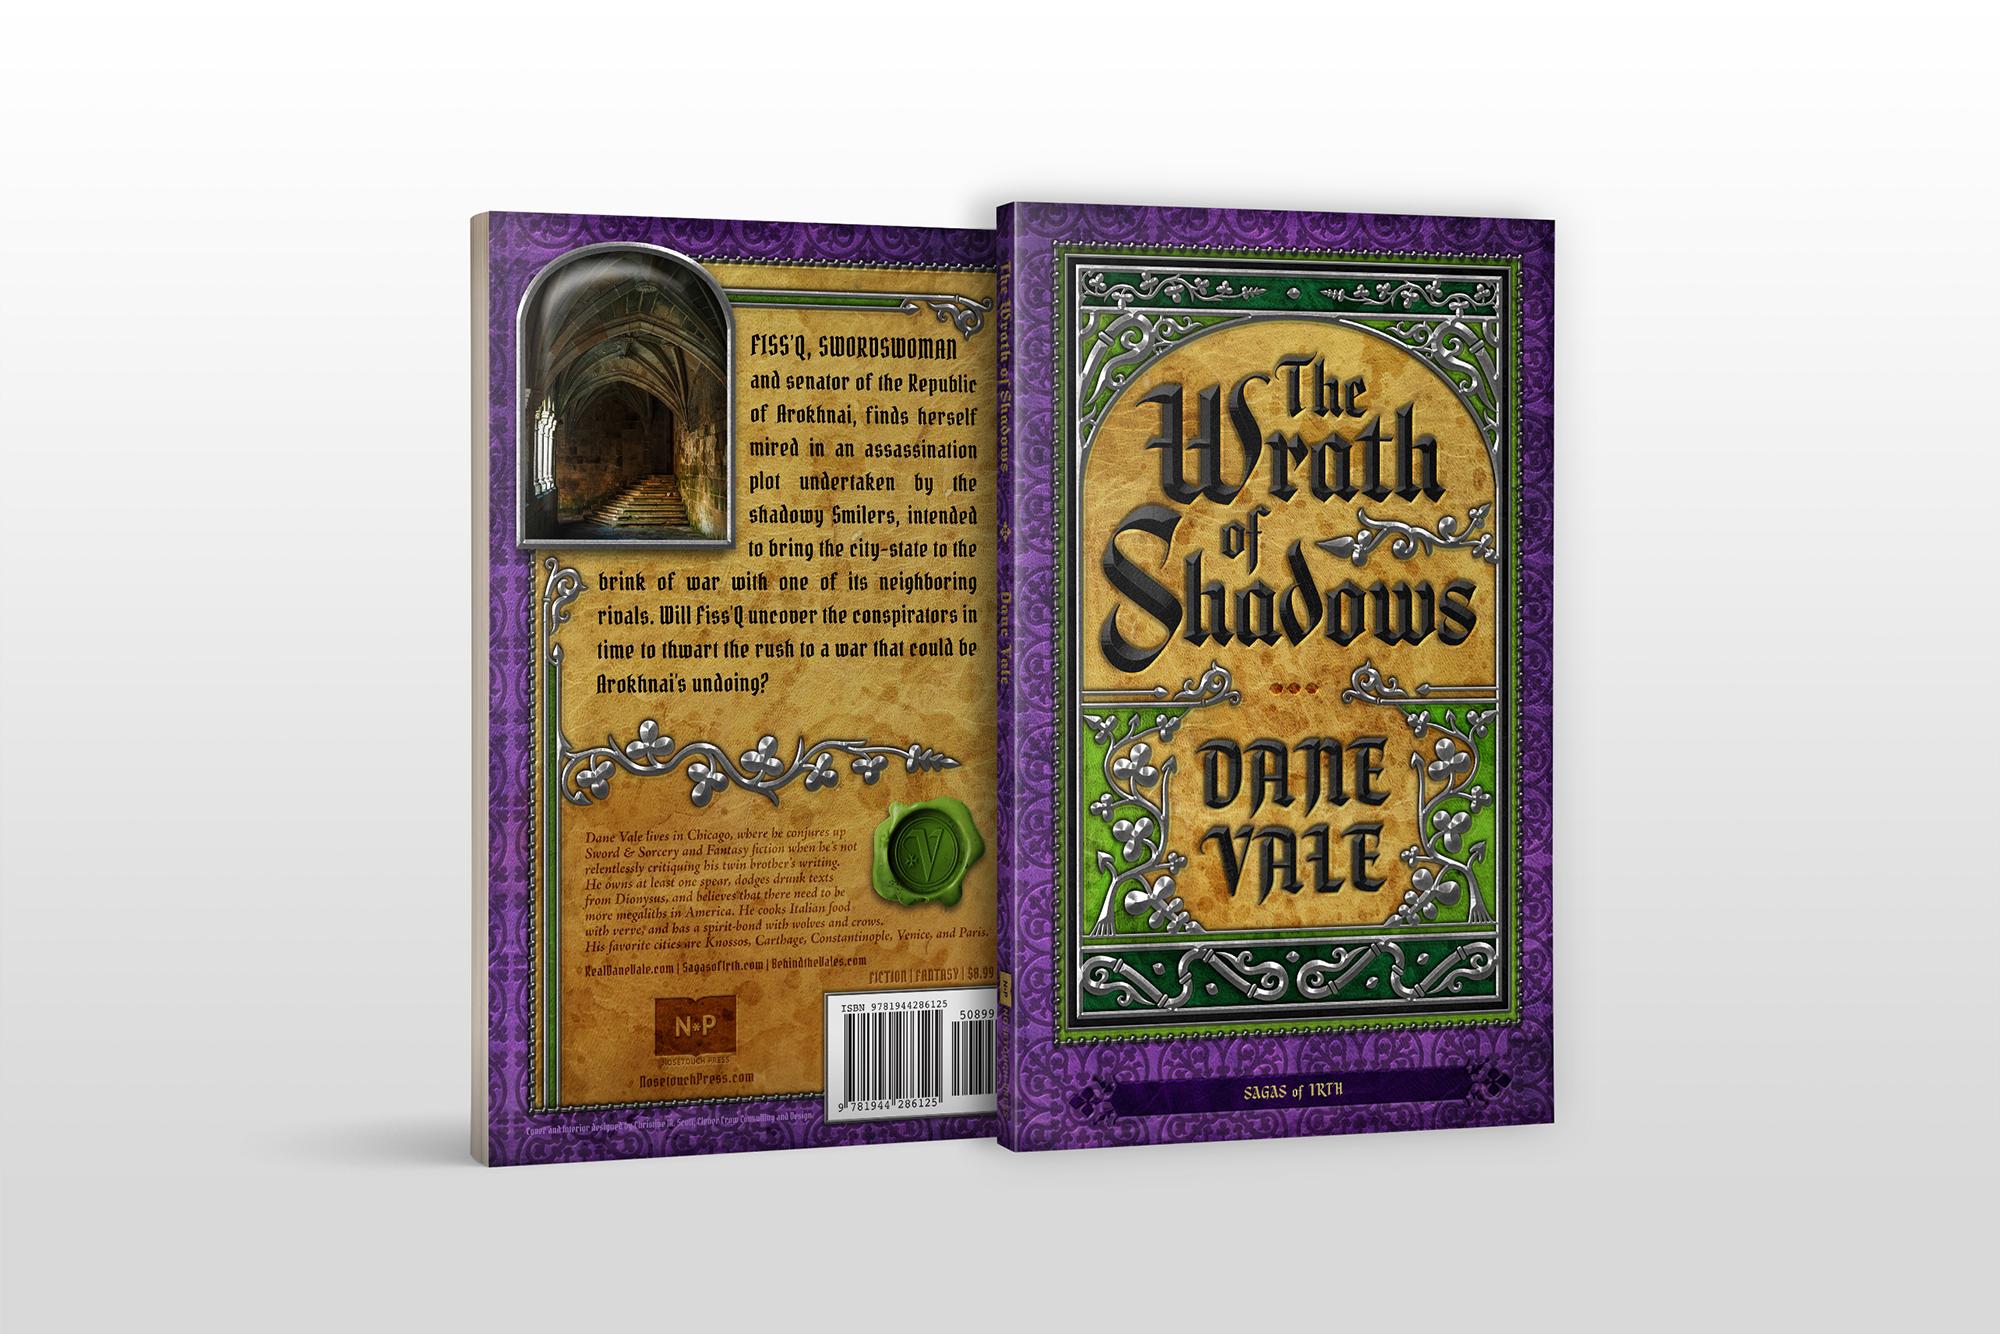 The Wrath of Shadows Cover and Interior Design